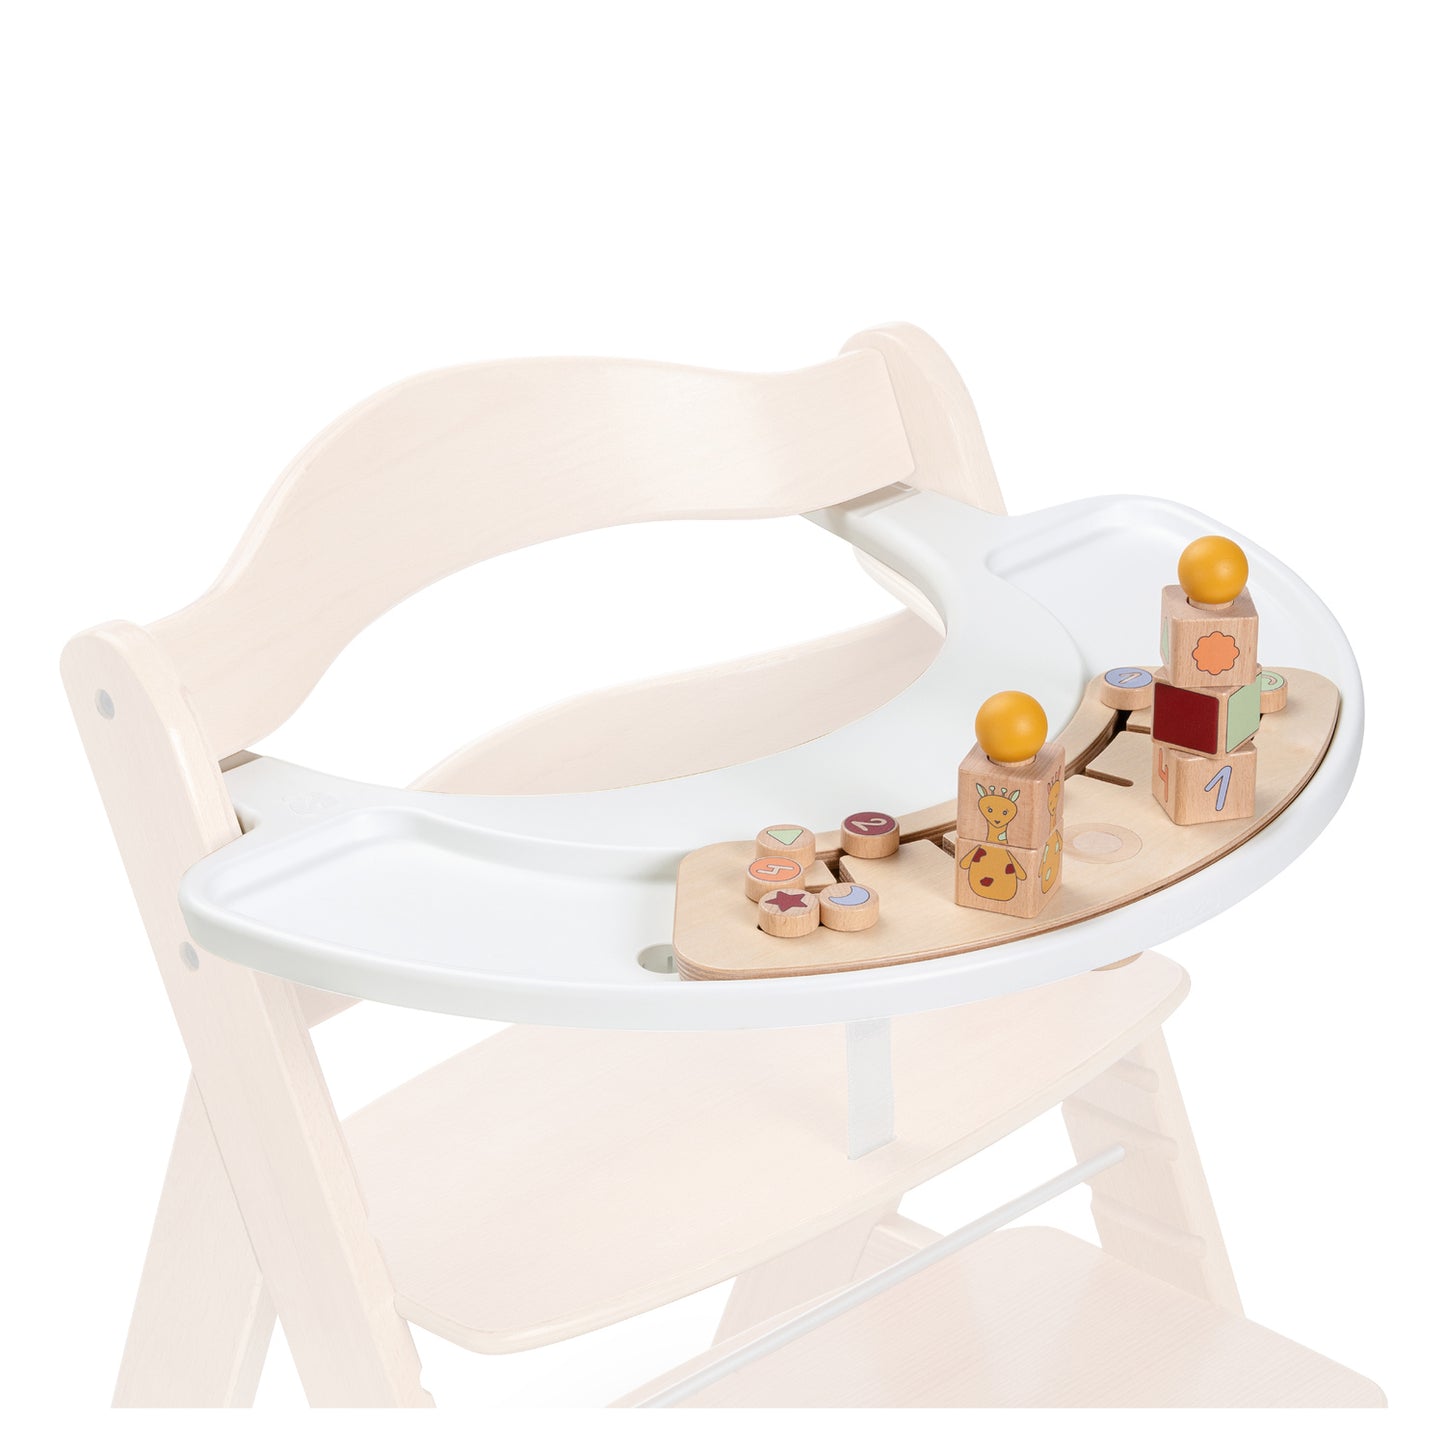 hauck Alpha Play Sorting Set Wooden Highchair Playset and Tray